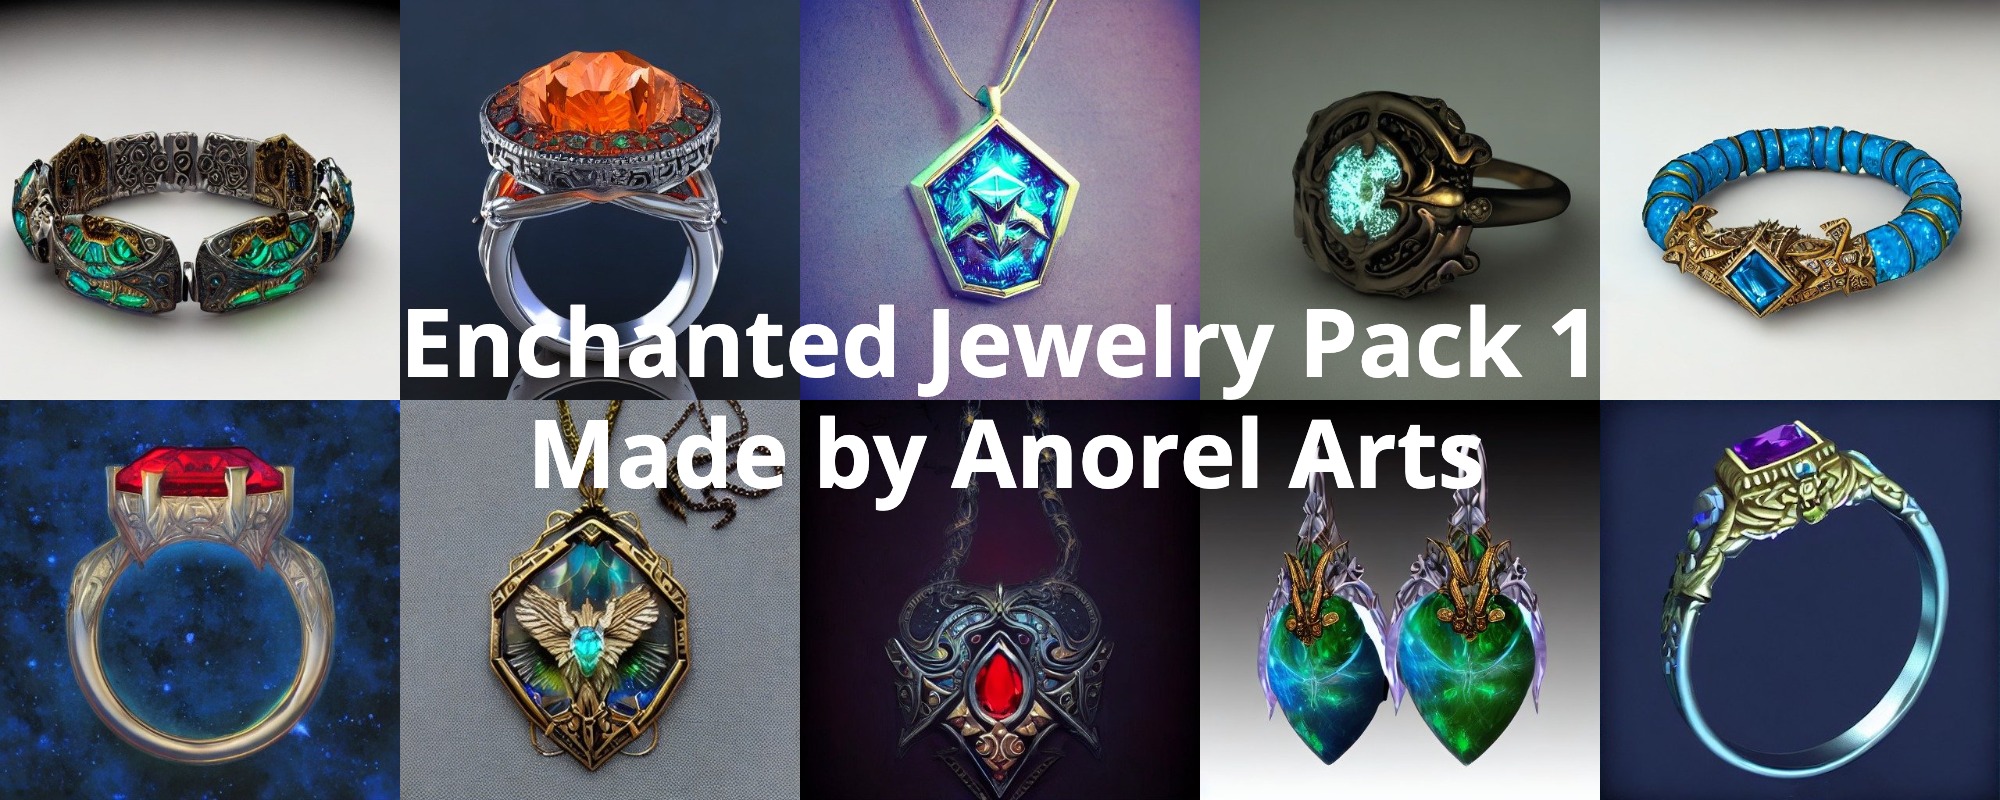 Enchanted Jewelry Pack 1